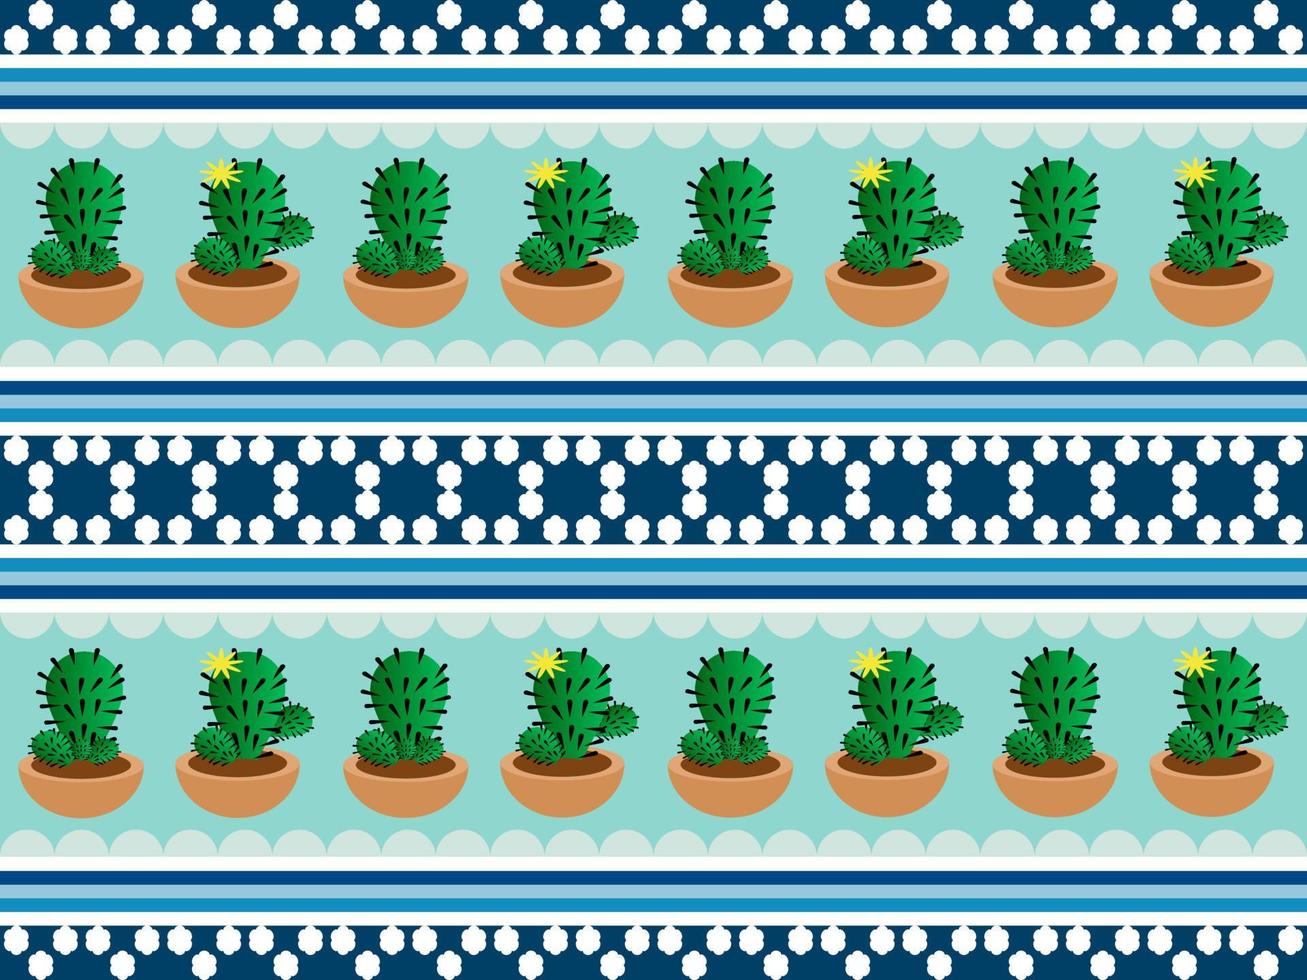 cactus cartoon character on blue background vector